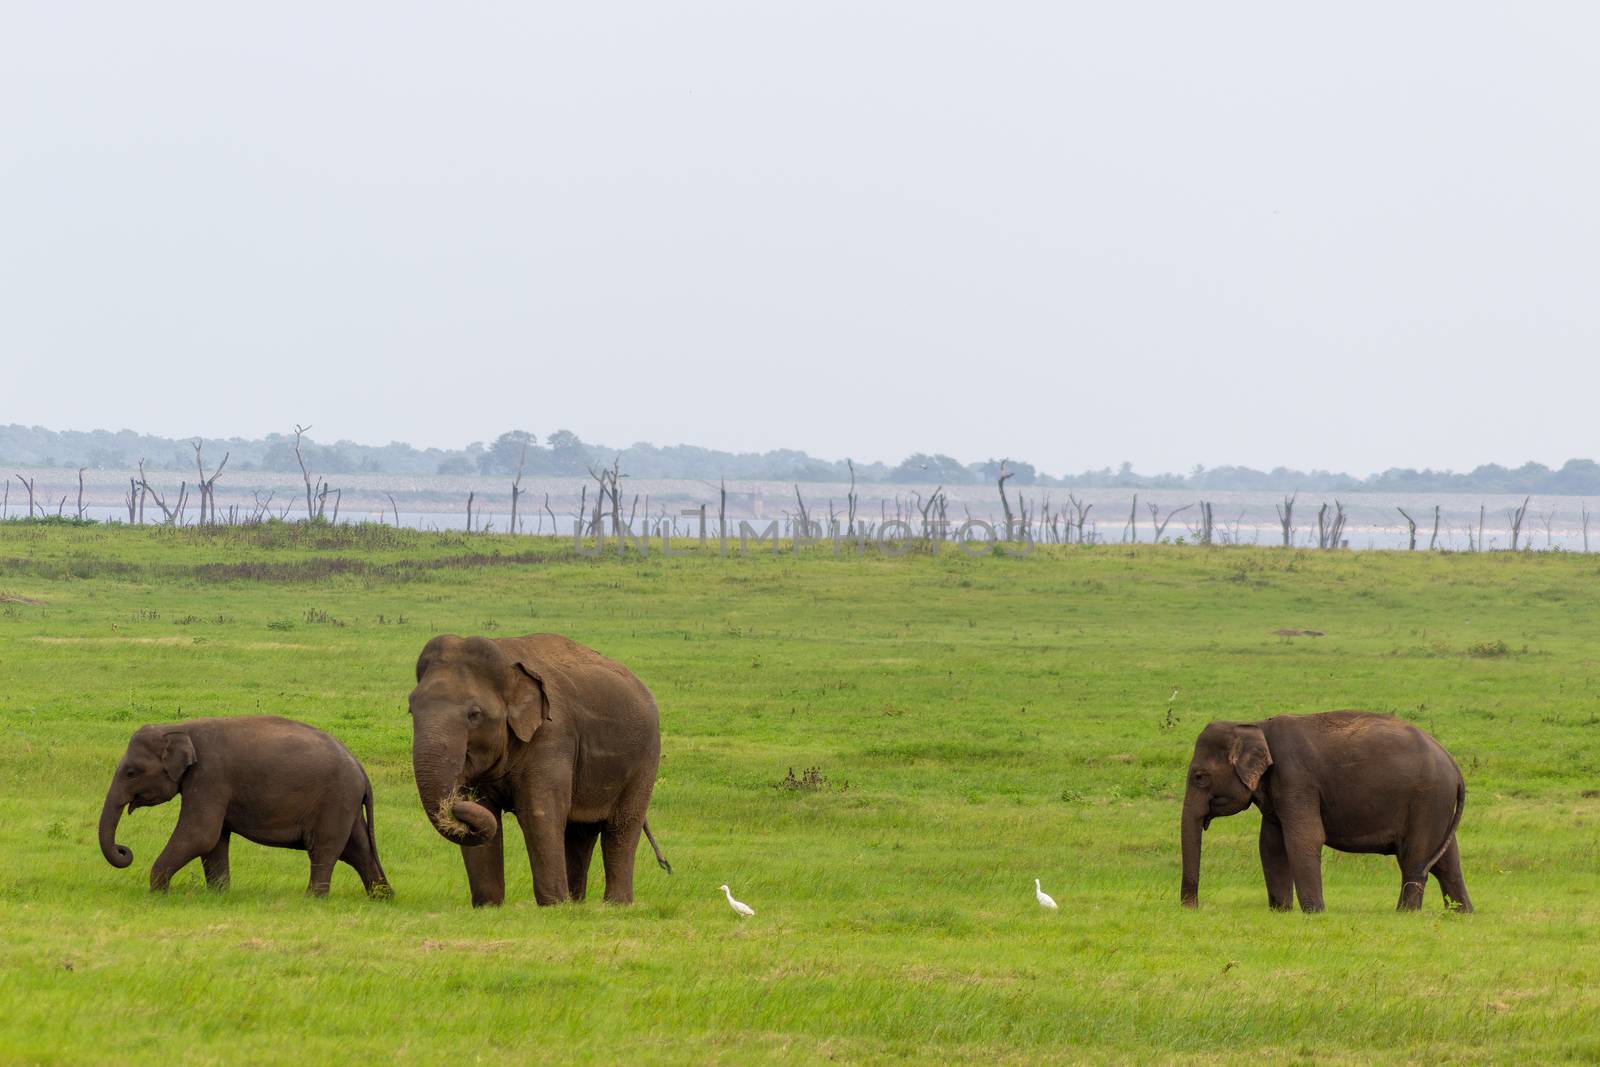 Two Baby elephants with mother and savanna birds on a green field relaxing. Concept of animal care, travel and wildlife observation. by dugulan